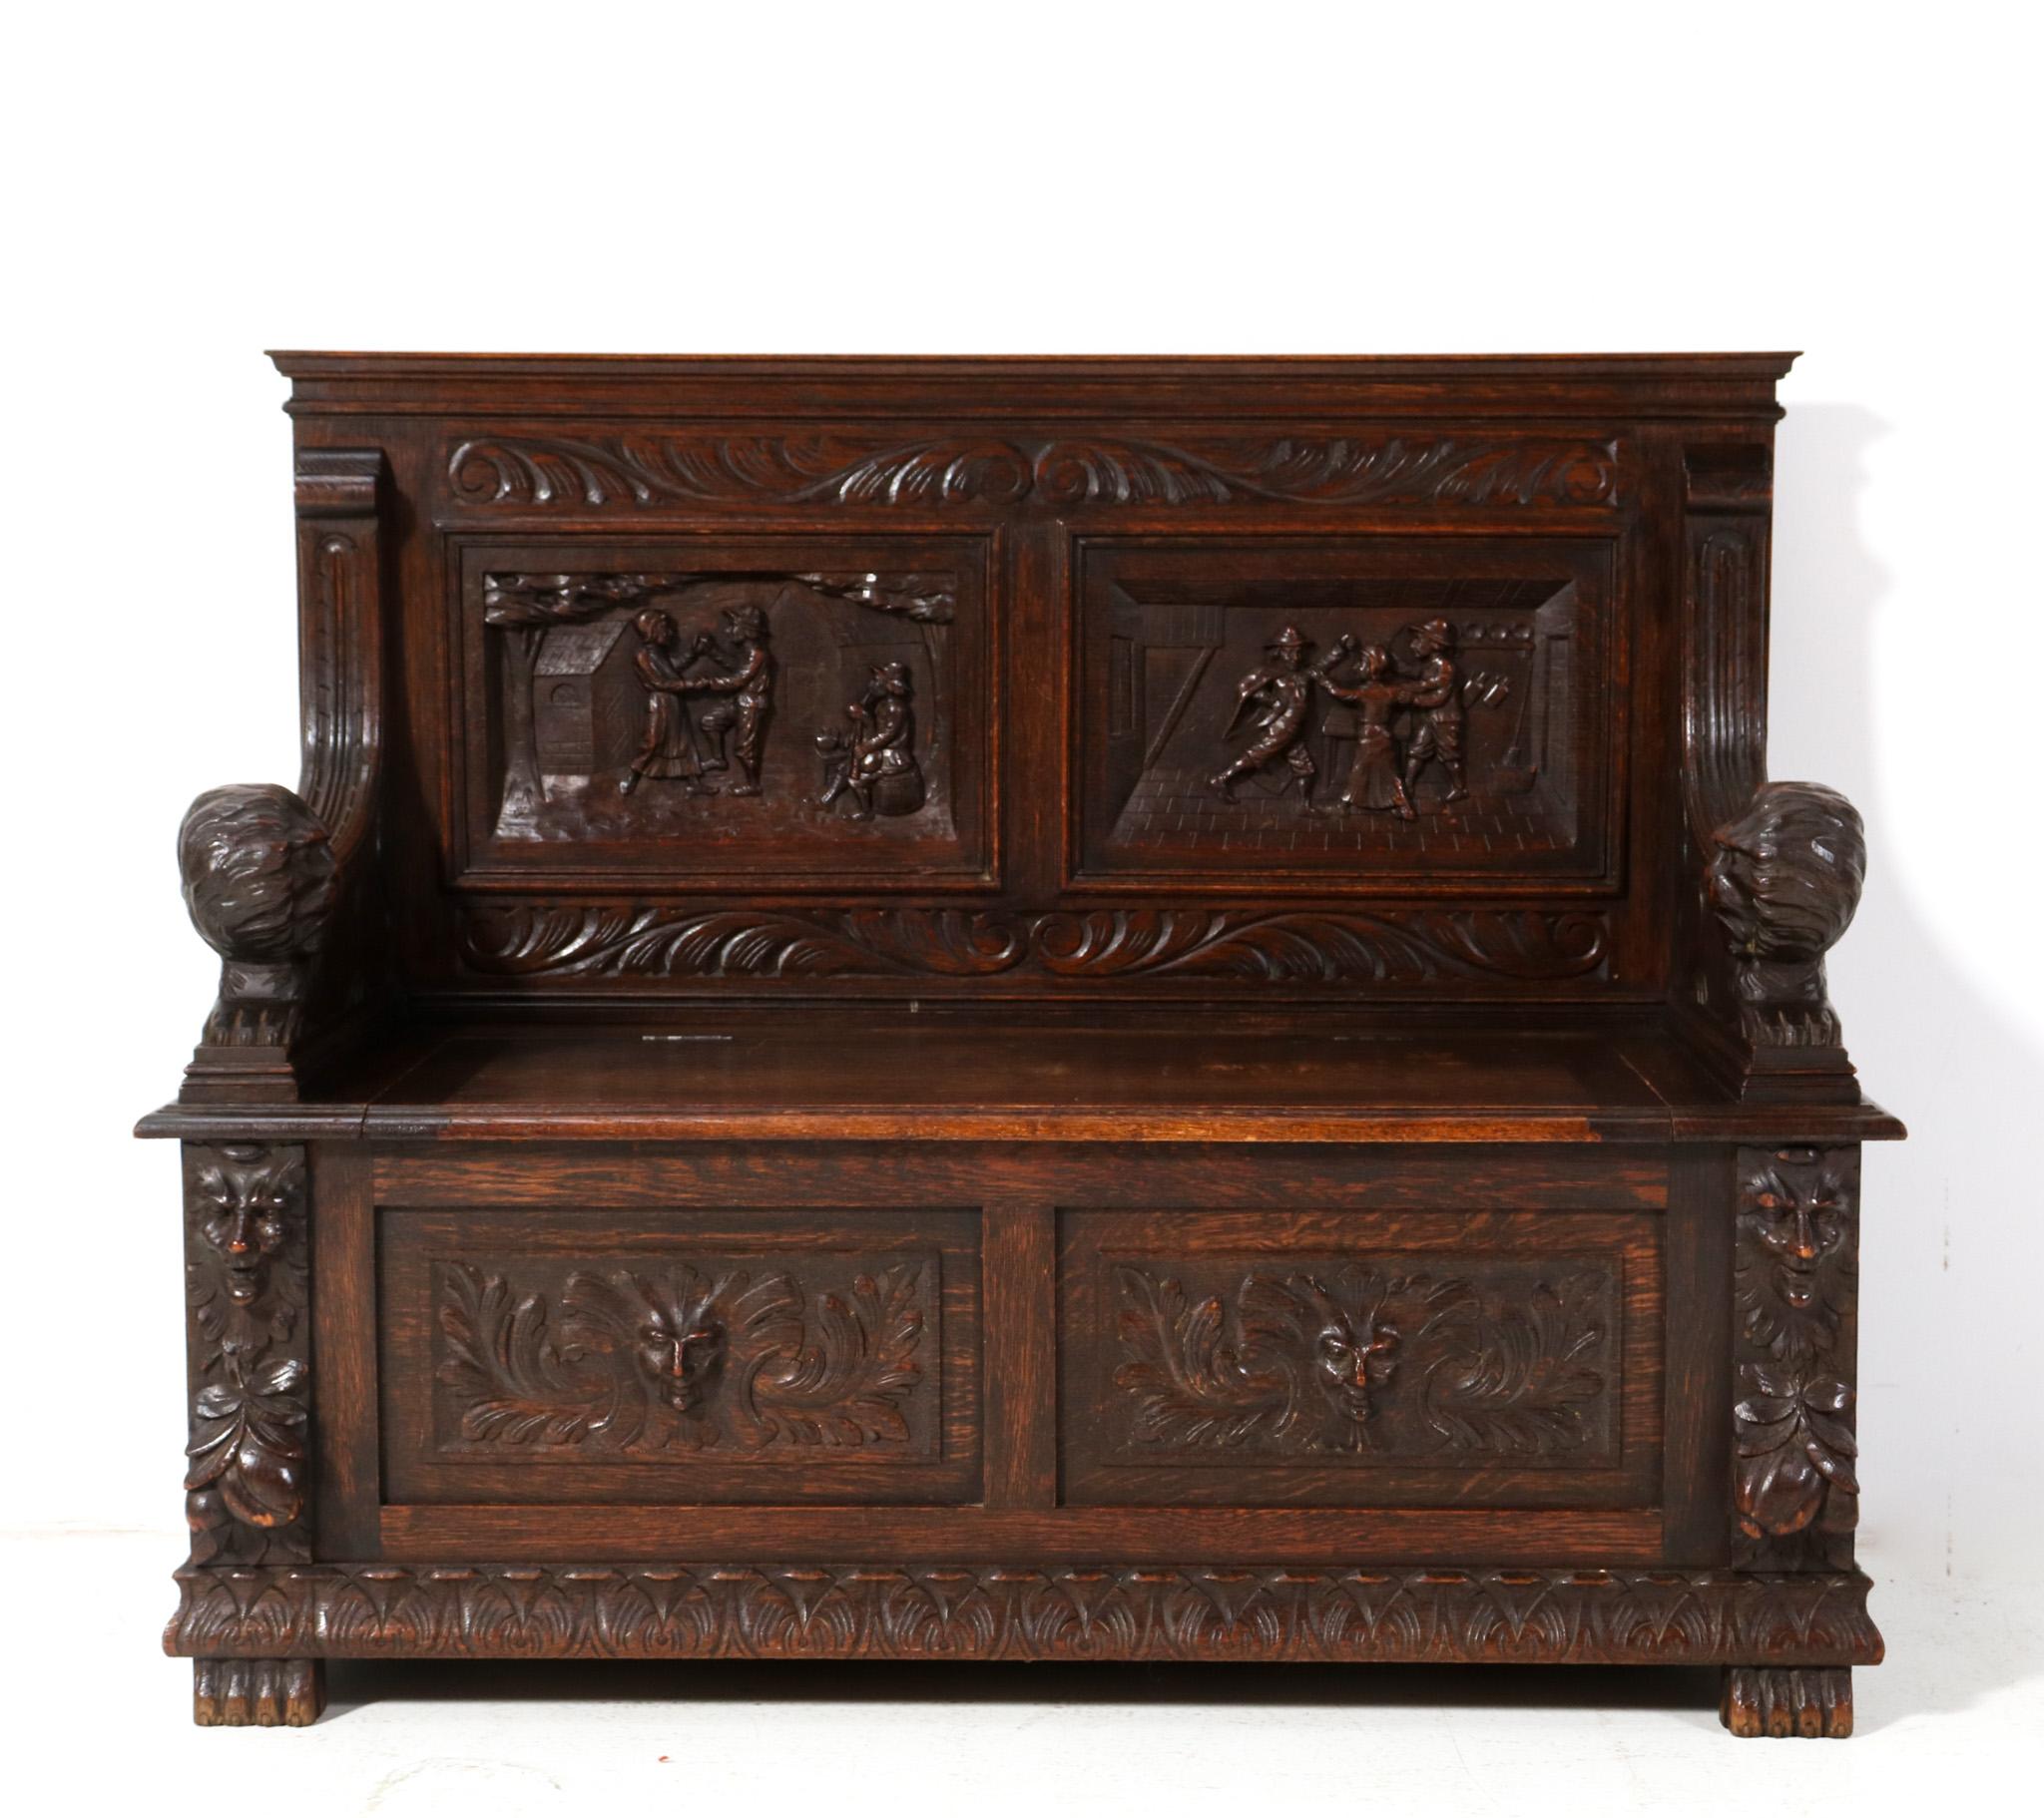 Magnificent and rare Renaissance Revival hall bench.
Striking Dutch design from the 1890s.
Solid oak base with original hand-carved lions as armrests and original hand-carved elements in the back.
Underneath the seat, there is room for storage.
This